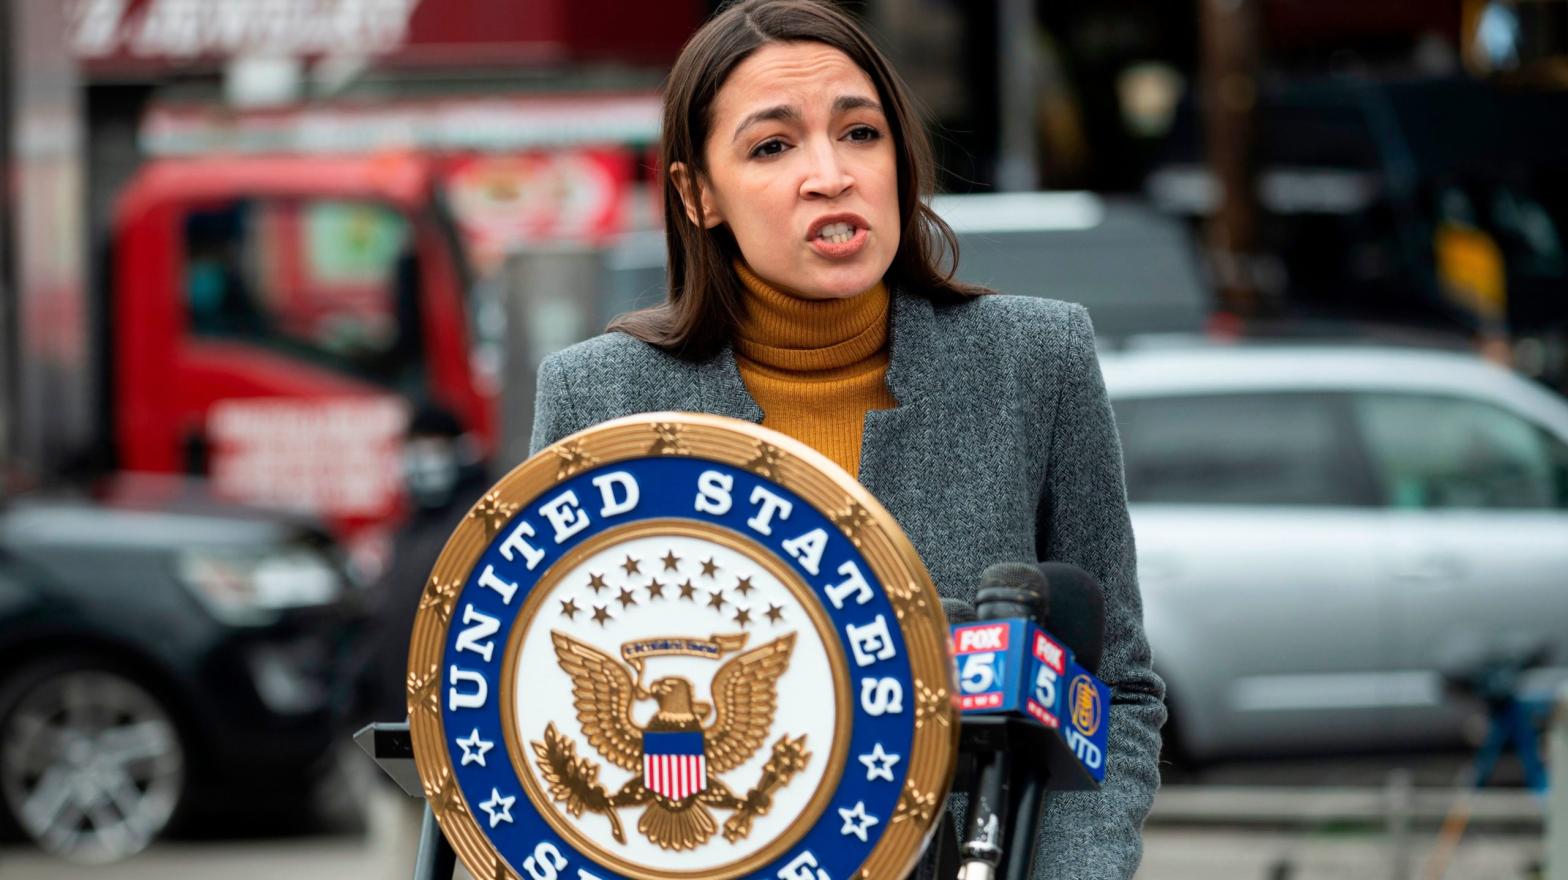 Alexandria Ocasio-Cortez speaking at a press conference in Queens in New York on April 14, 2020. (Photo: Johannes Eisele/AFP, Getty Images)